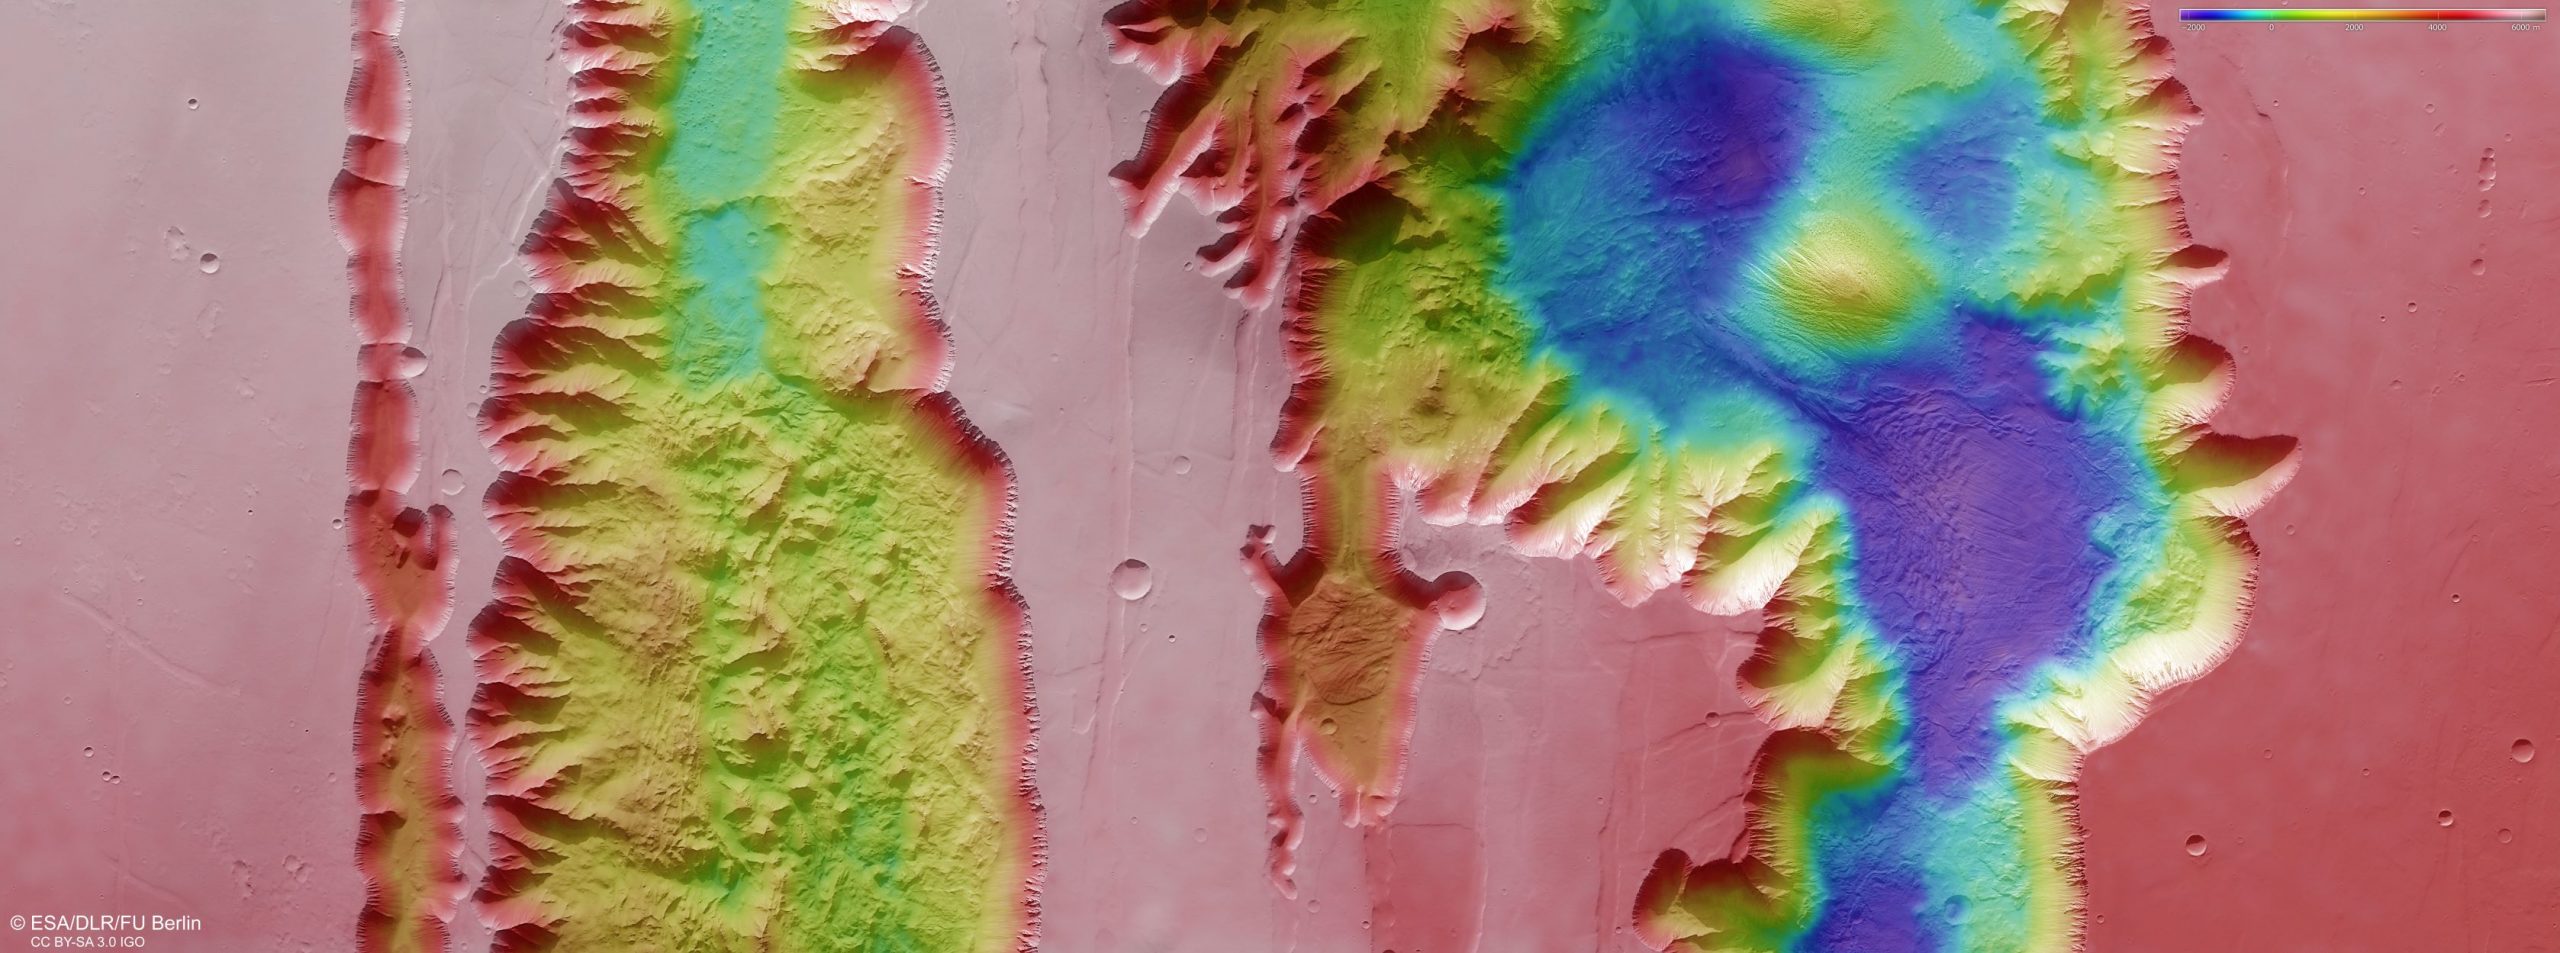 Mars' Valles Marineris canyon structure is represented in this colour-coded topographic image. ESA/DLR/FU Berlin, CC BY-SA 3.0 IGO.